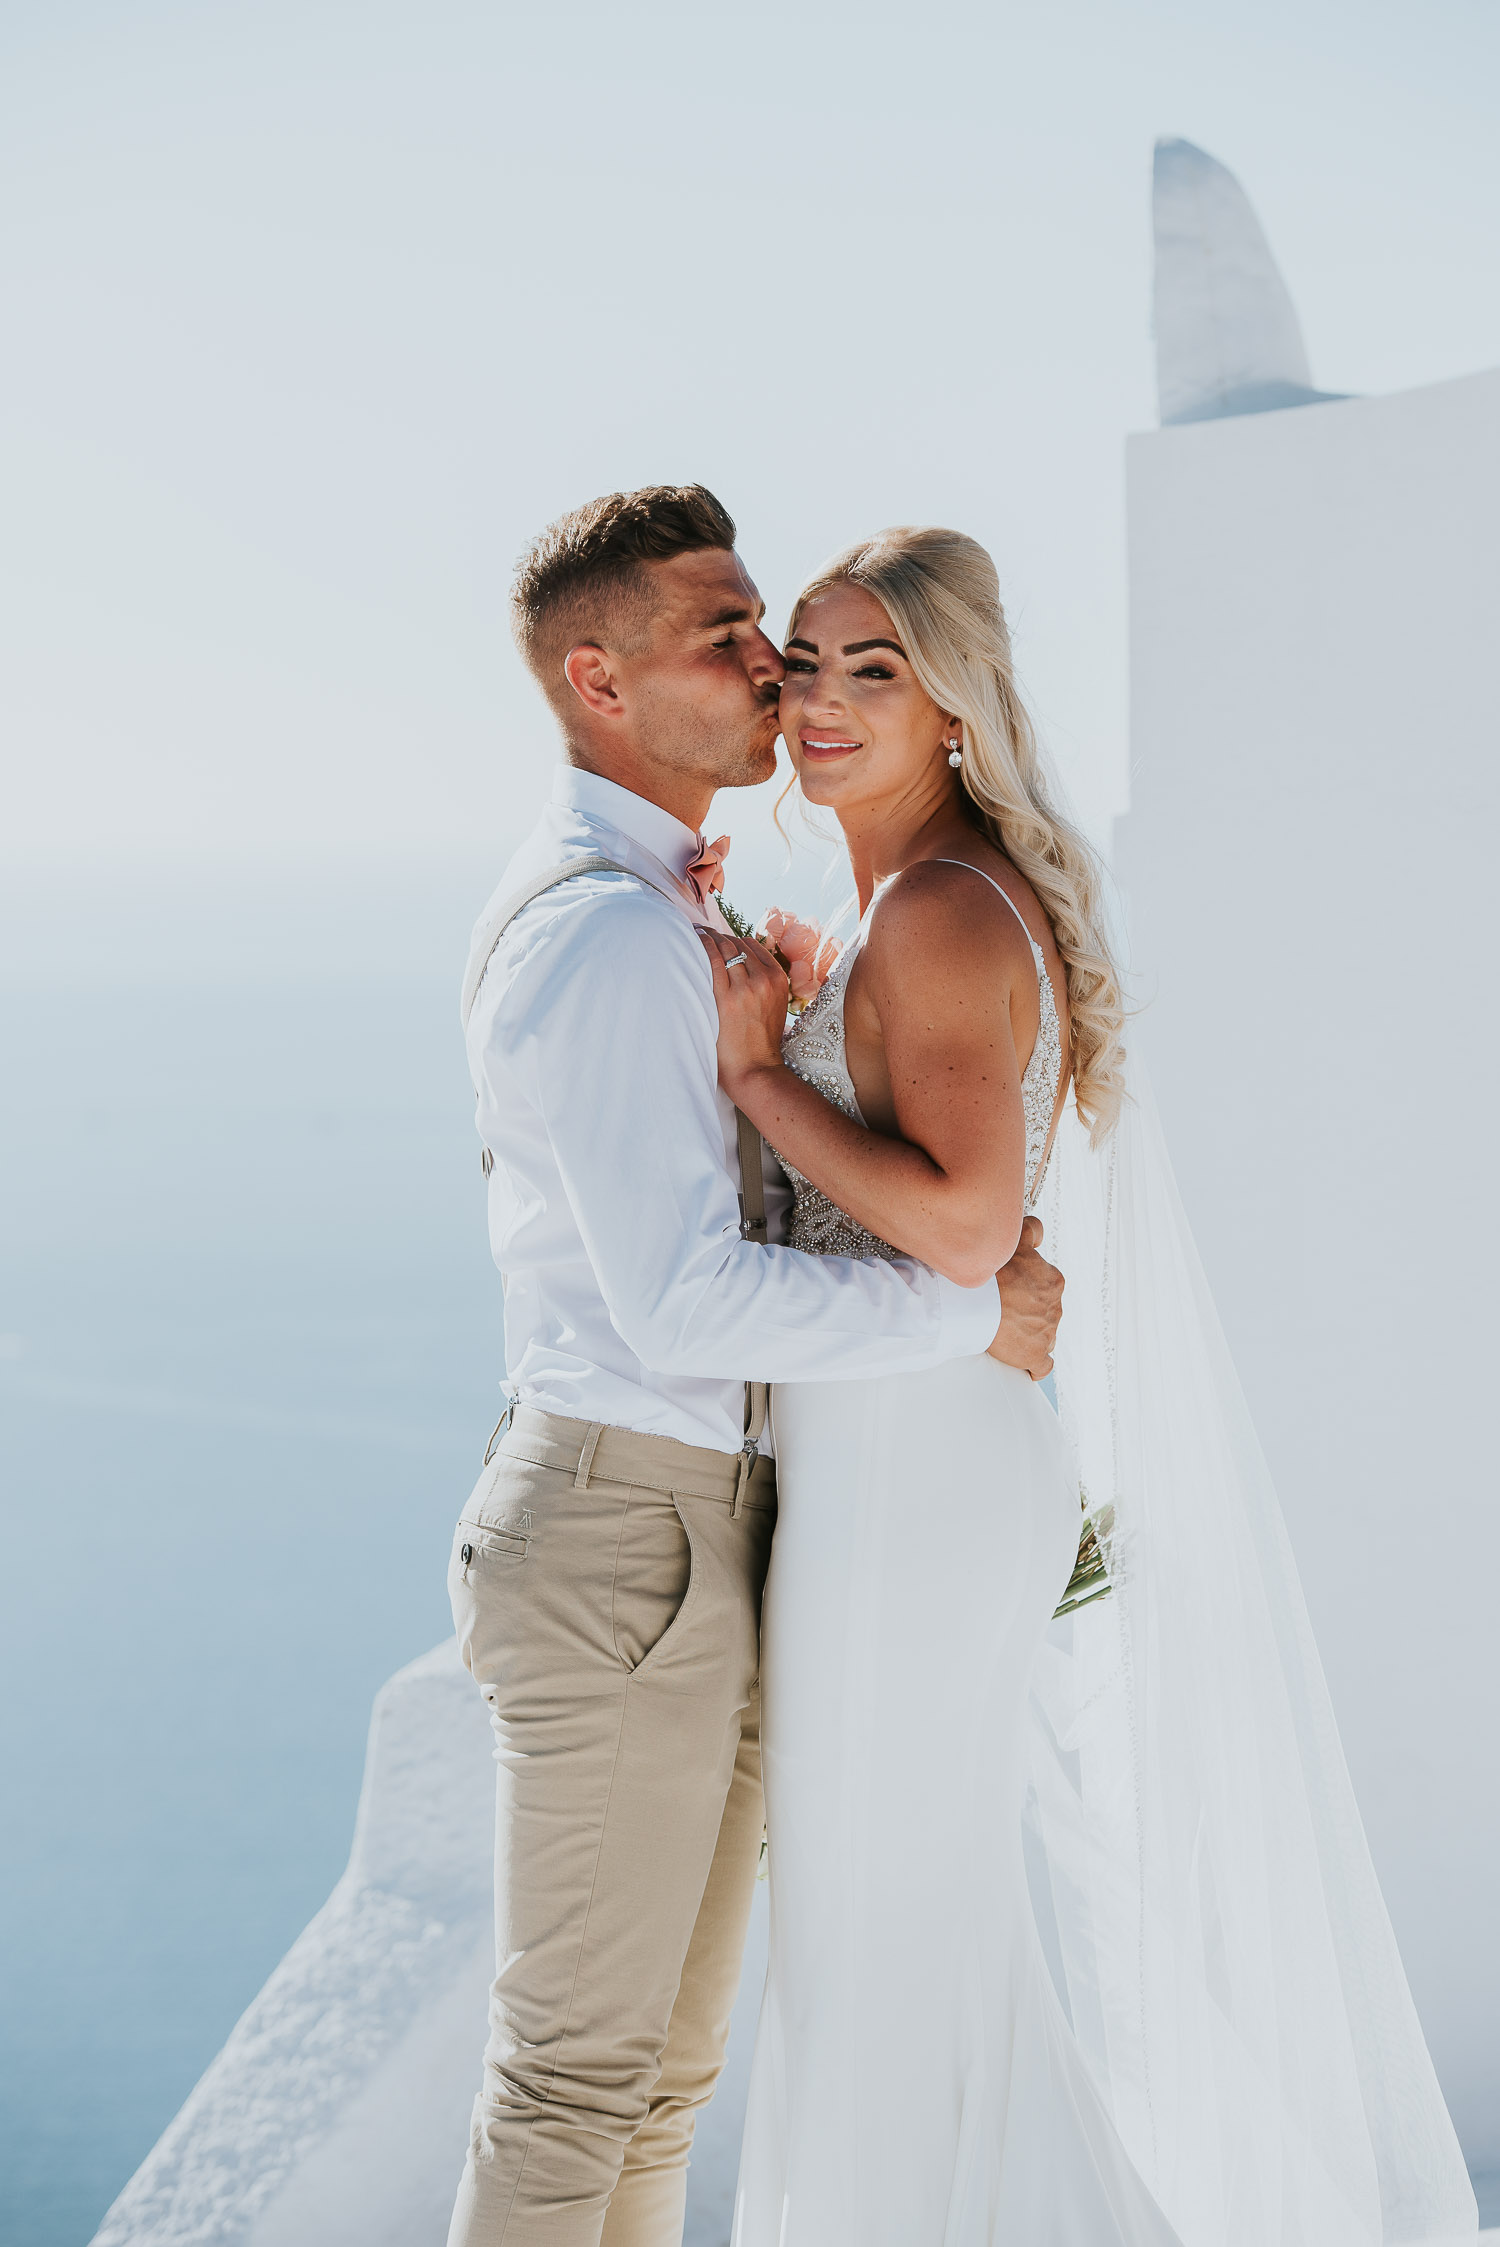 Wedding photographer Santorini: close up of groom kissing bride on a cheek in front of the bell tower basked in the afternoon light by Ben and Vesna.